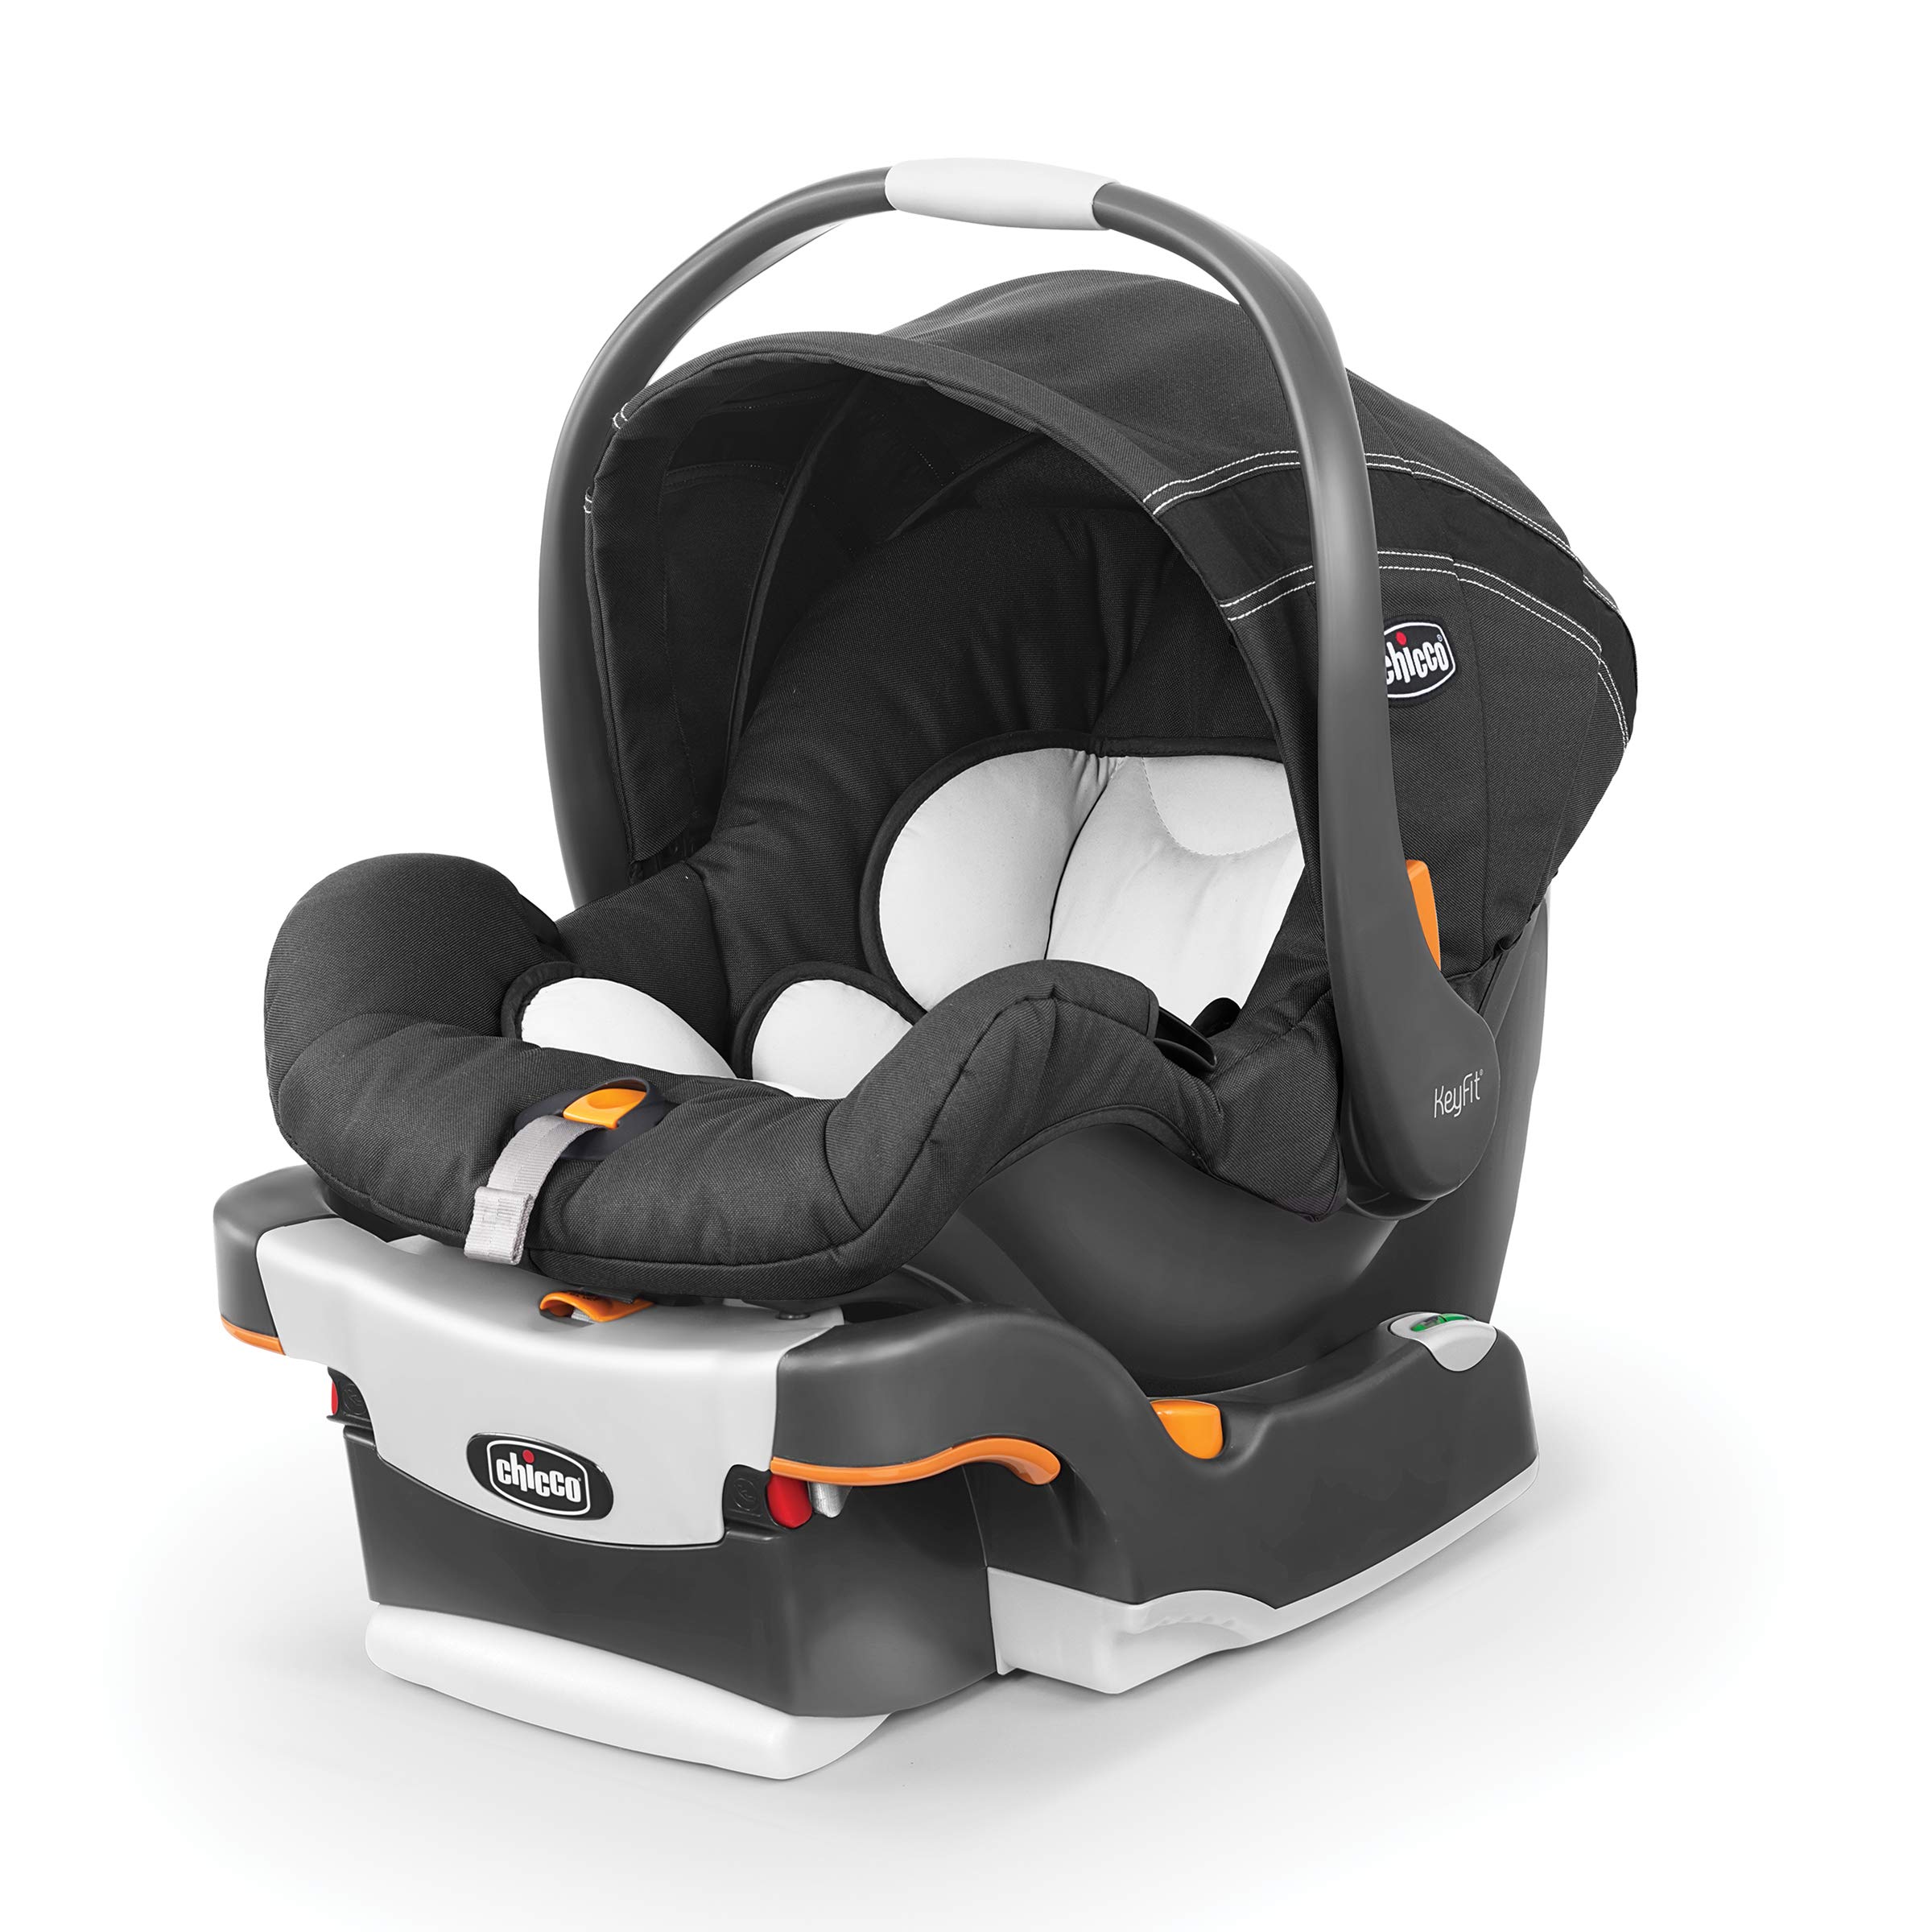 Chicco KeyFit Infant Car Seat and Base | Rear-Facing Seat for Infants 4- 22 lbs. | Includes Infant Head and Body Support | Compatible with Chicco Strollers | Baby Travel Gear